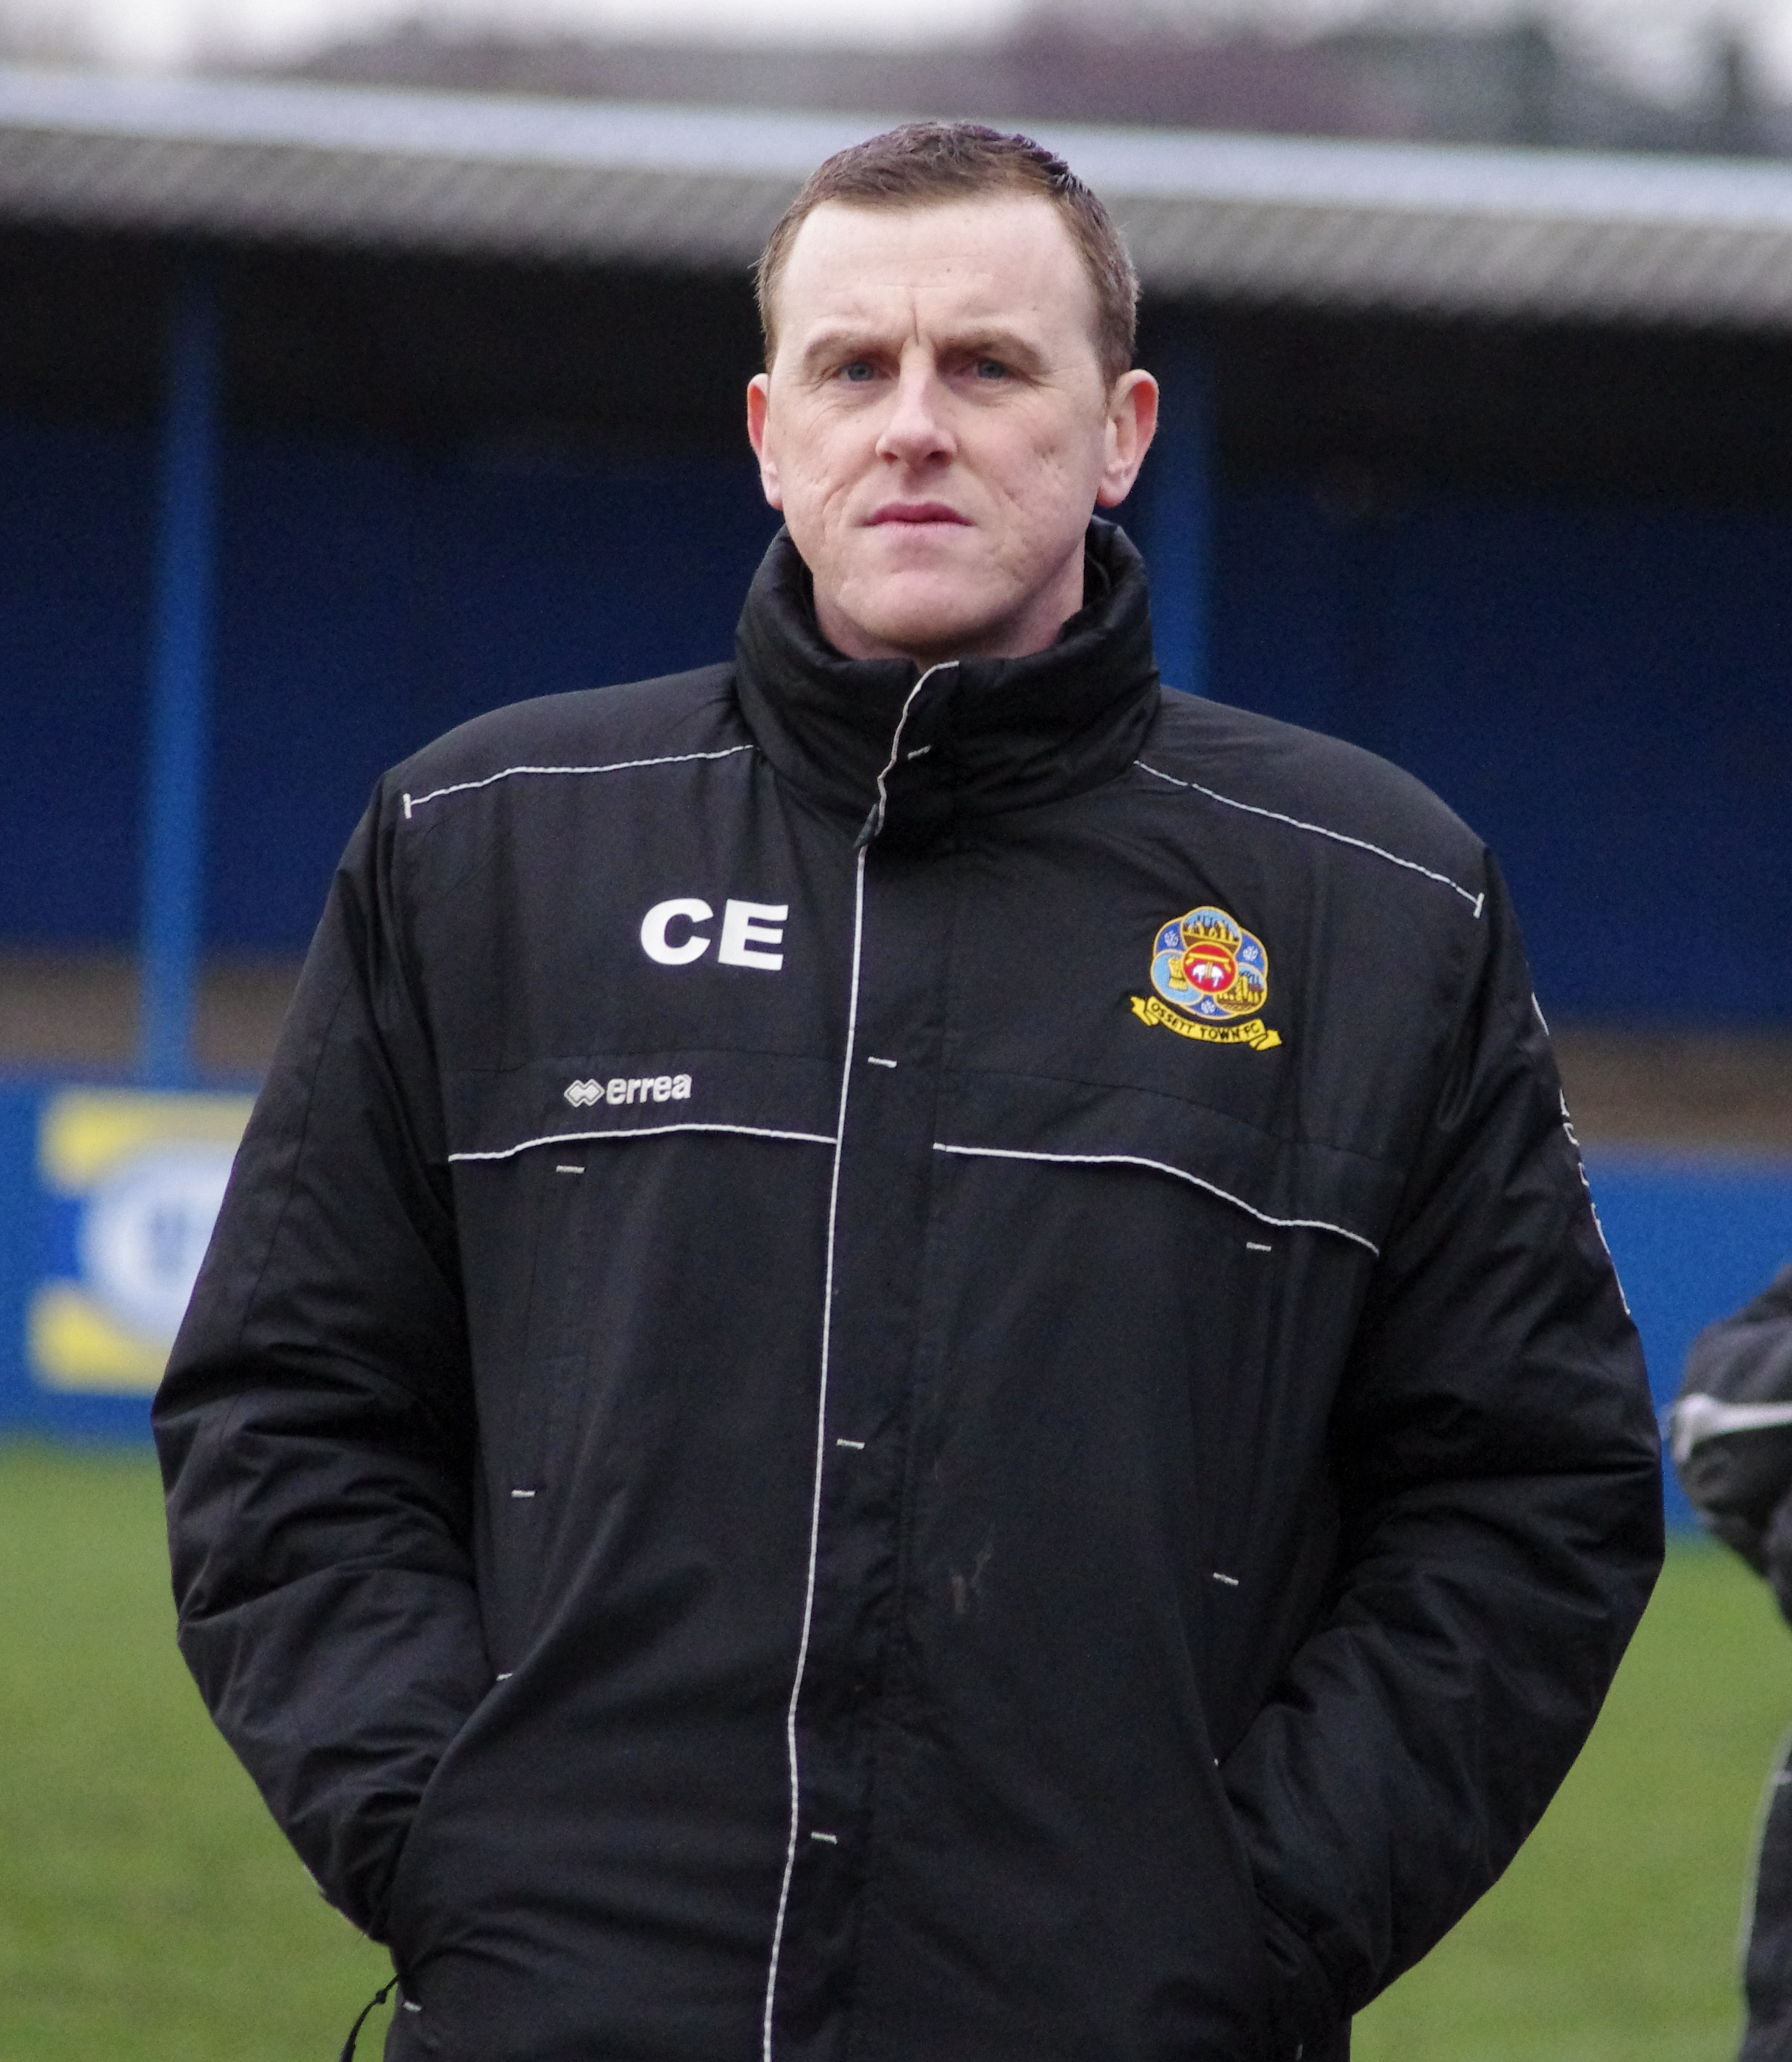 Craig Elliott has reported his observations about referee David Benton's manner during the 1-1 draw at Farsley AFC to the FA